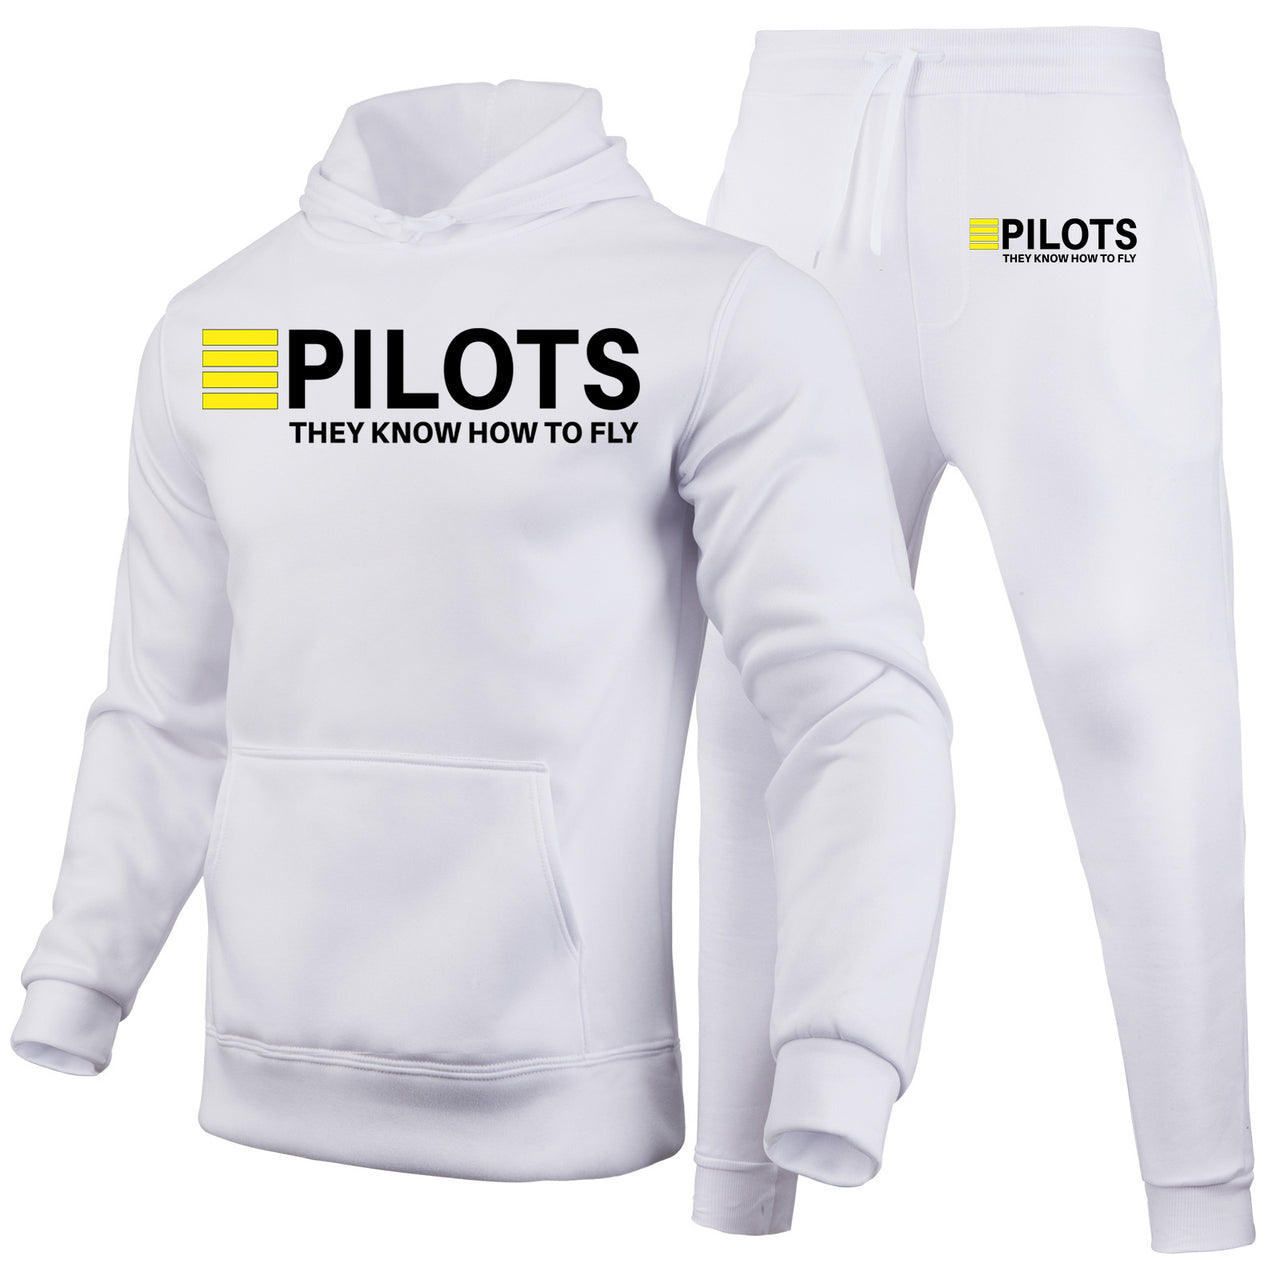 Pilots They Know How To Fly Designed Hoodies & Sweatpants Set